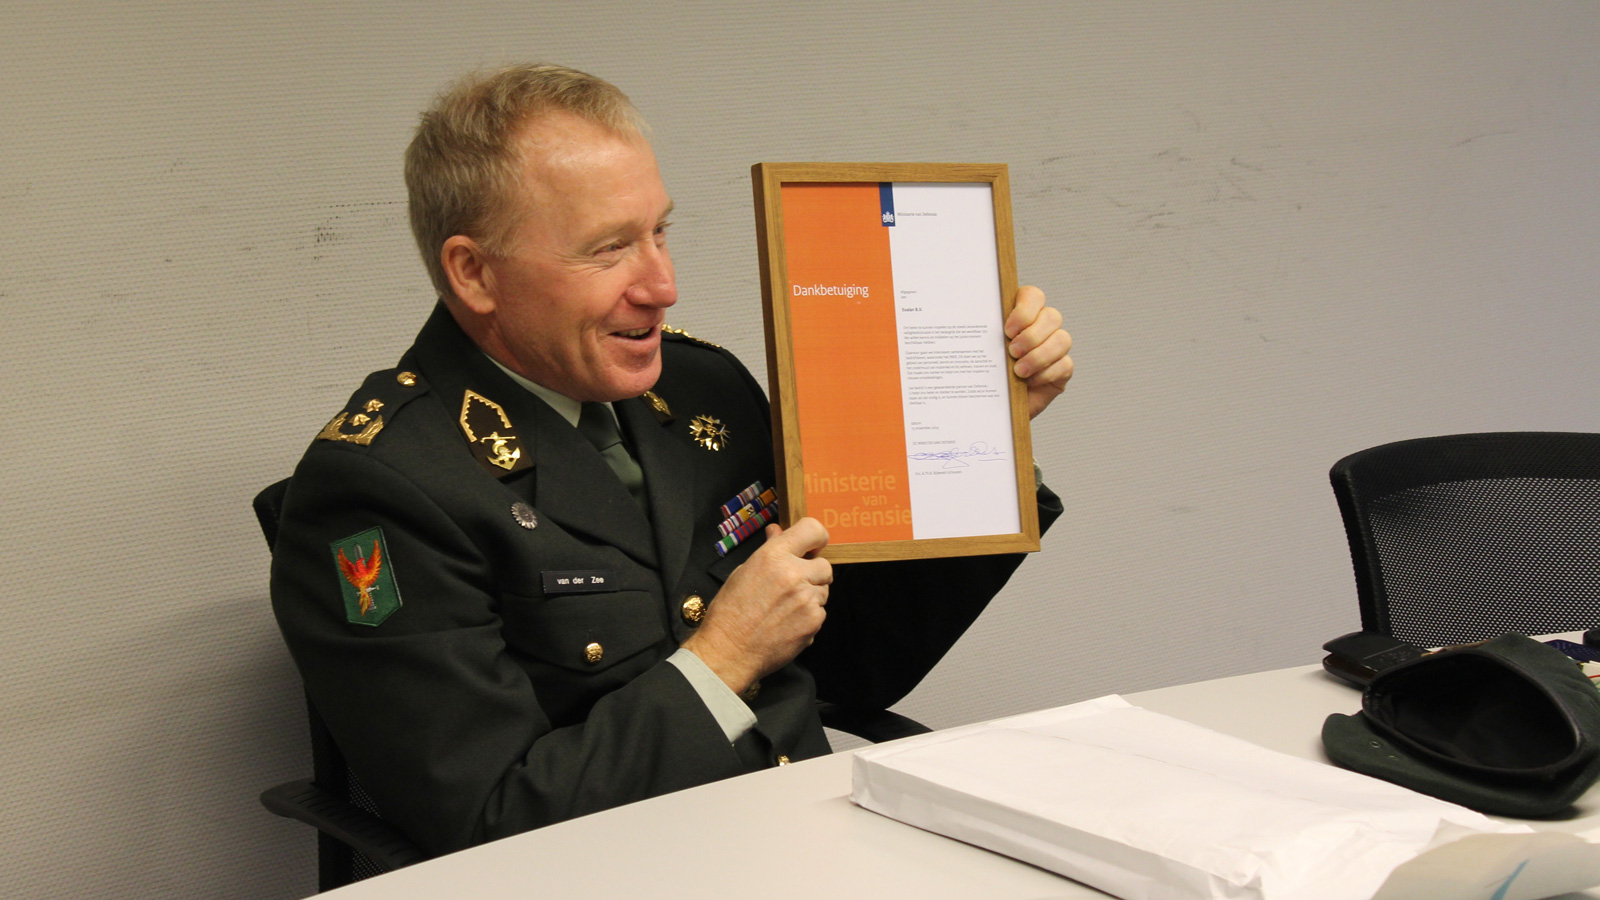 Evalan received an acknowledgement from the Minister of Defense Ank Bijleveld-Schouten